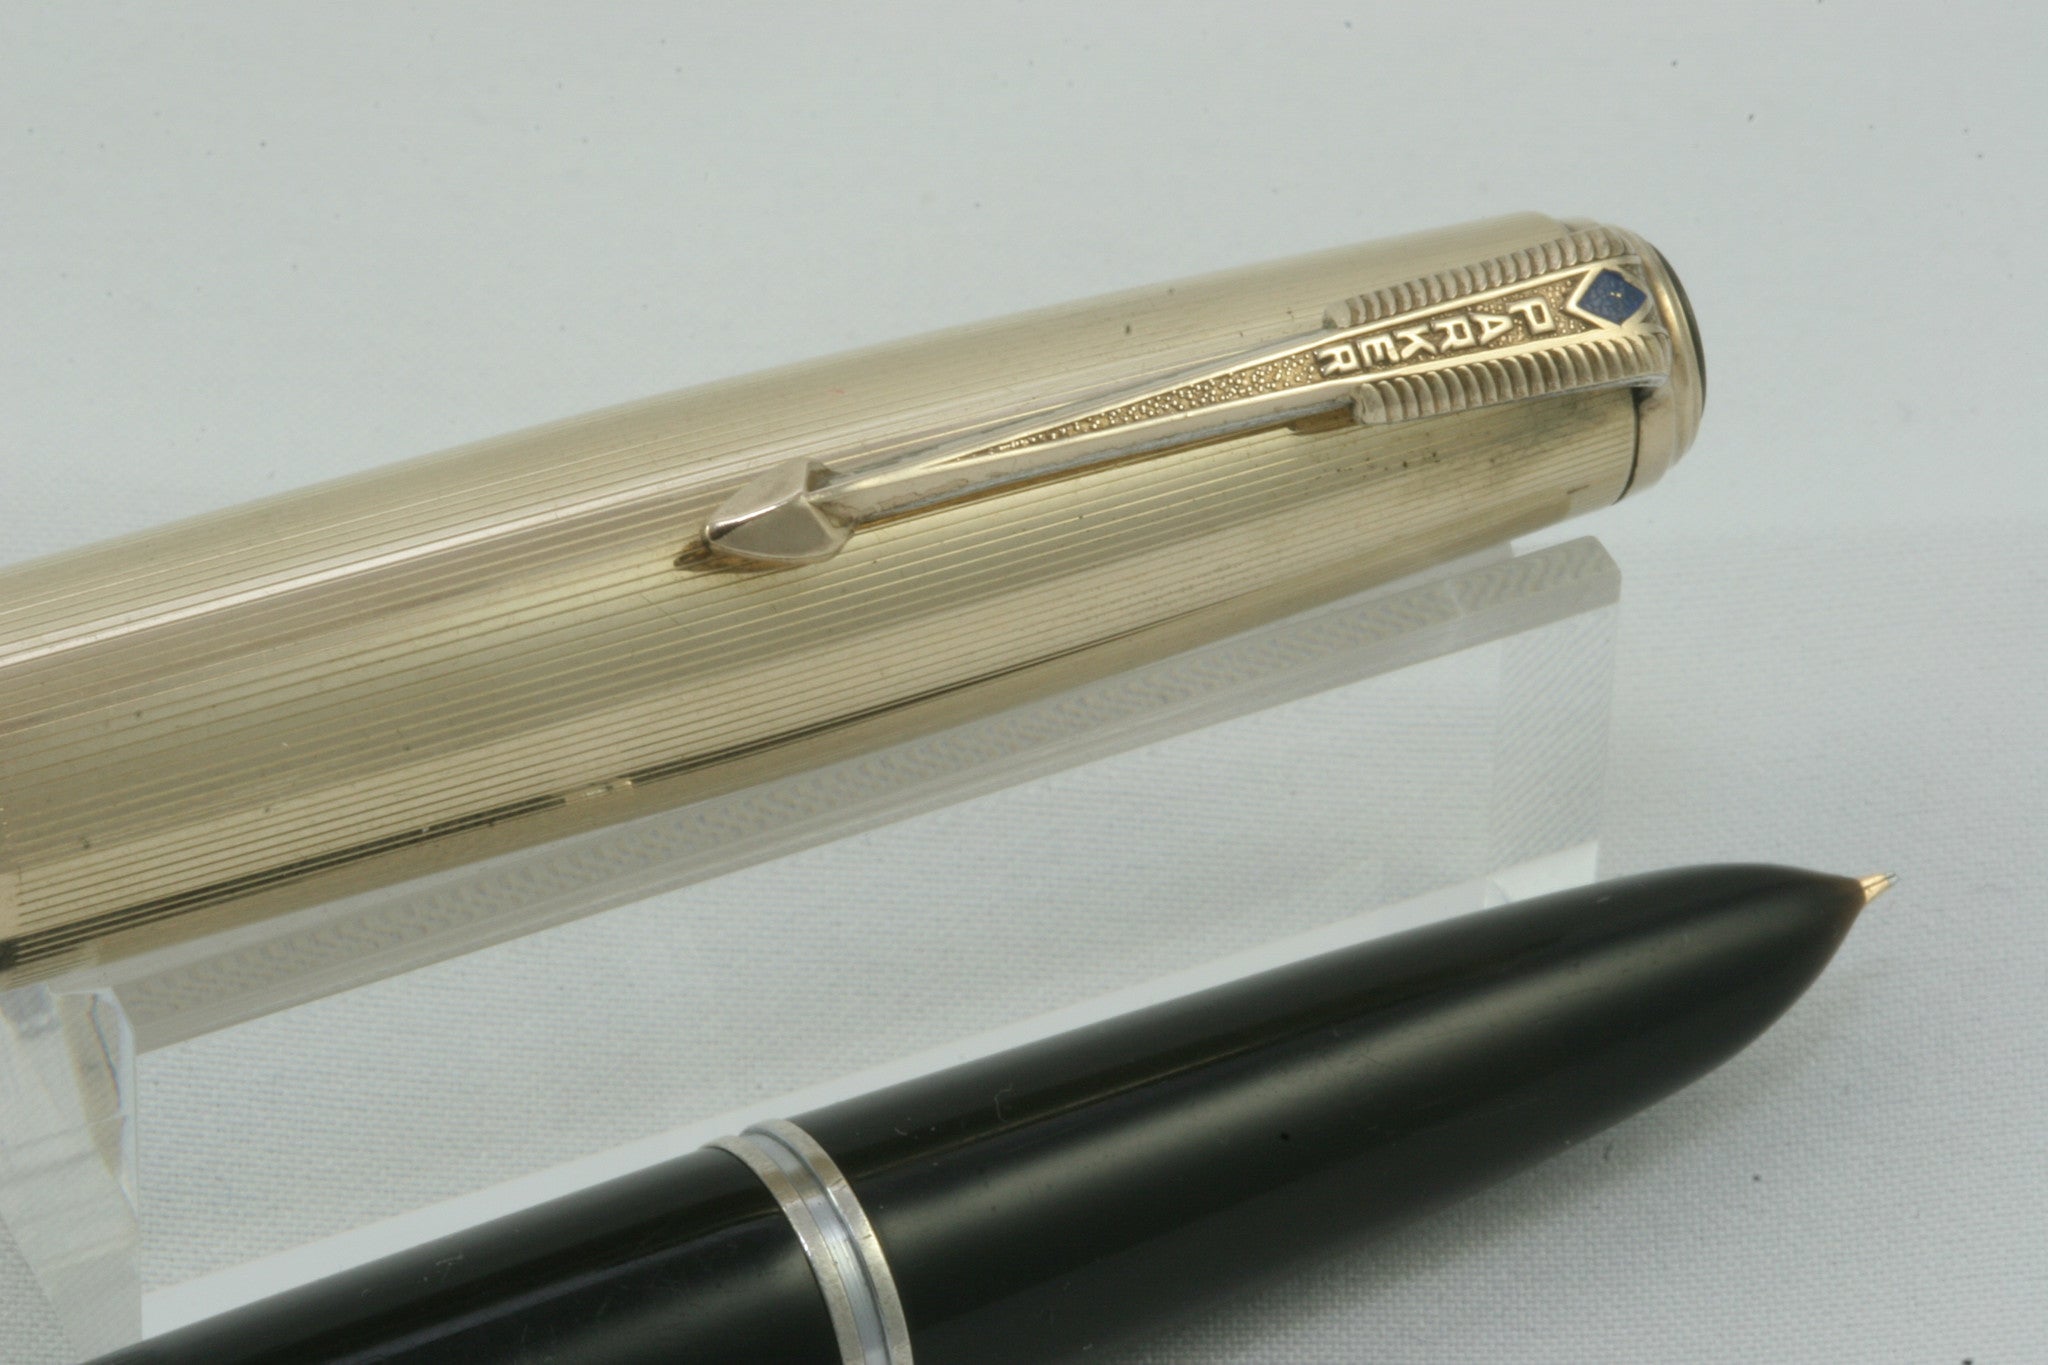 Parker 51 Vacumatic Black - Gold Filled Cap - Fully Restored And Working